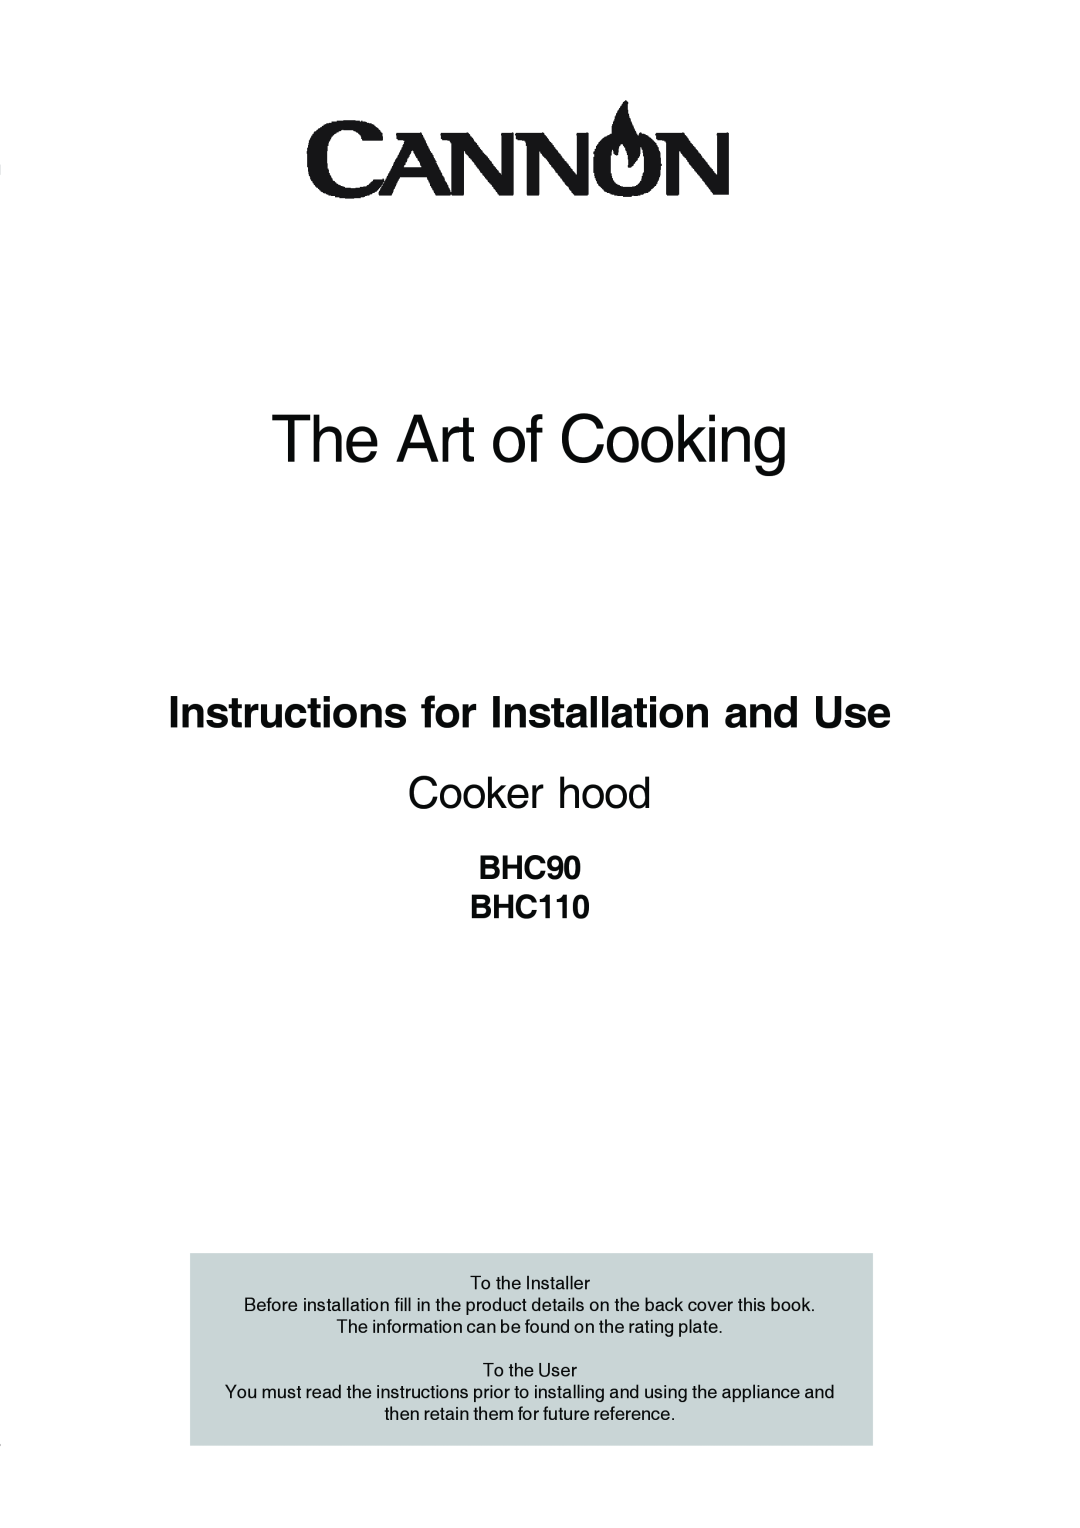 Cannon manual BHC90 BHC110, The Art of Cooking, Instructions for Installation and Use, Cooker hood 